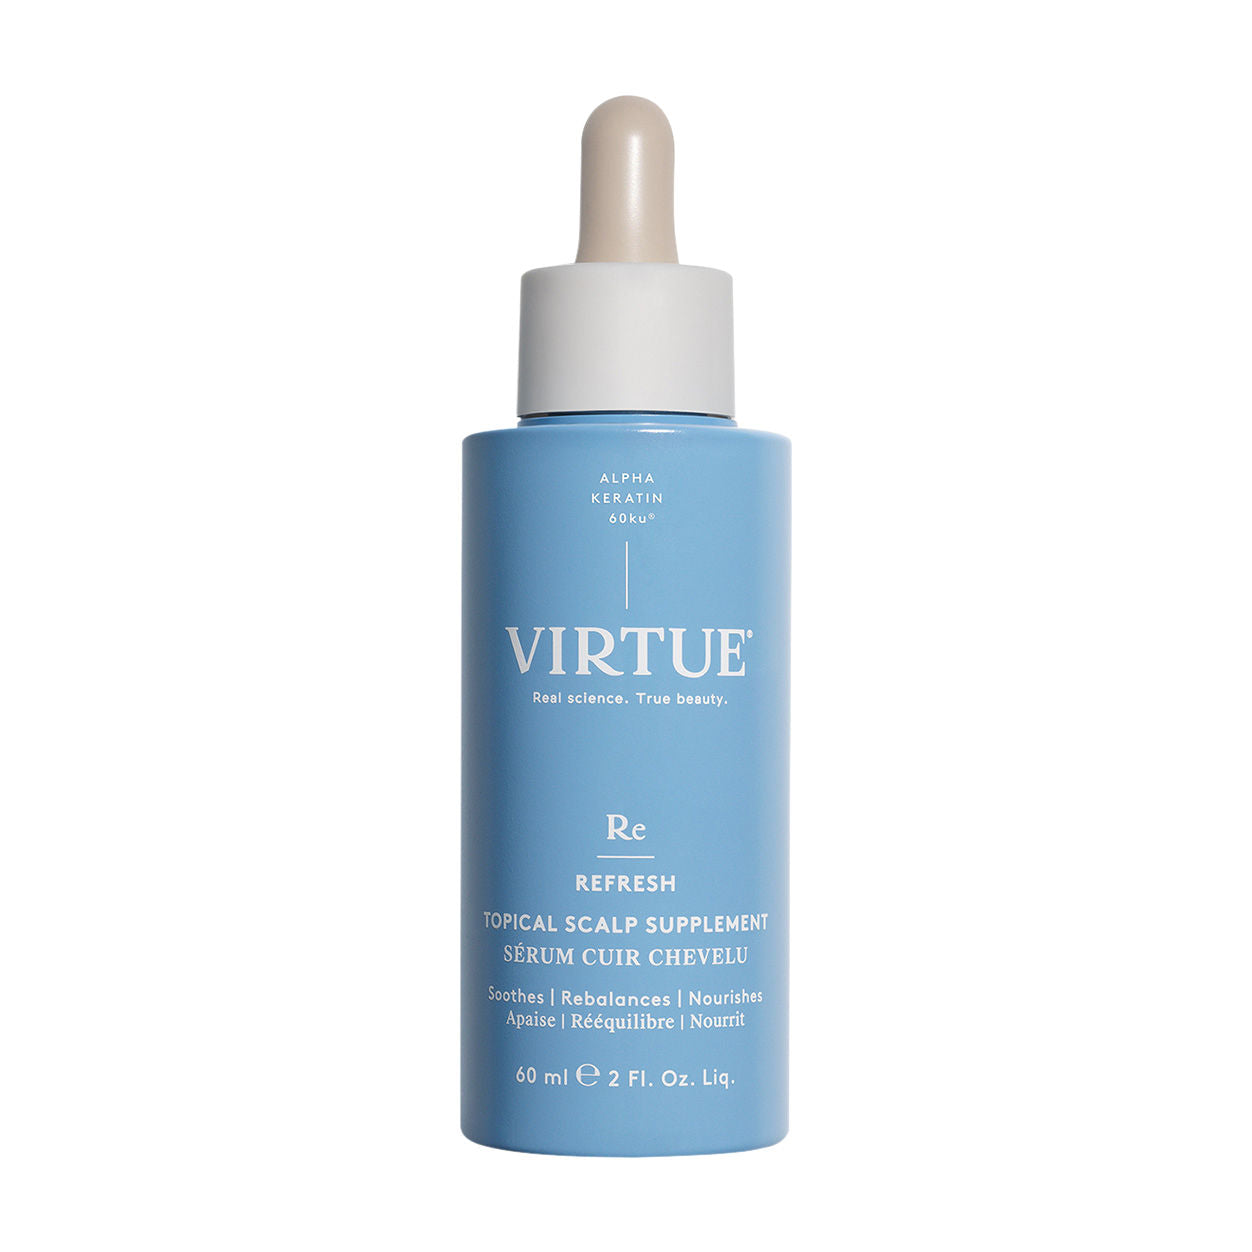 Virtue Refresh Topical Scalp Supplement main image